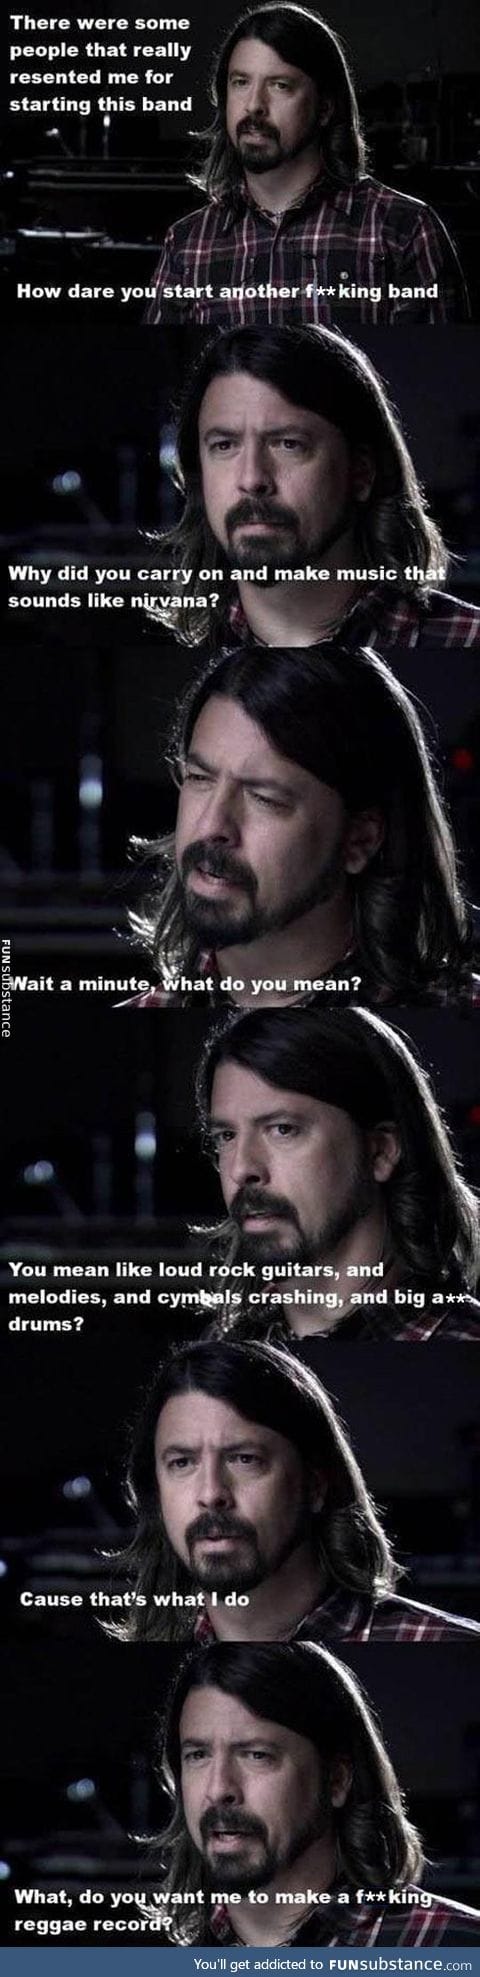 Dave grohl telling it like it is